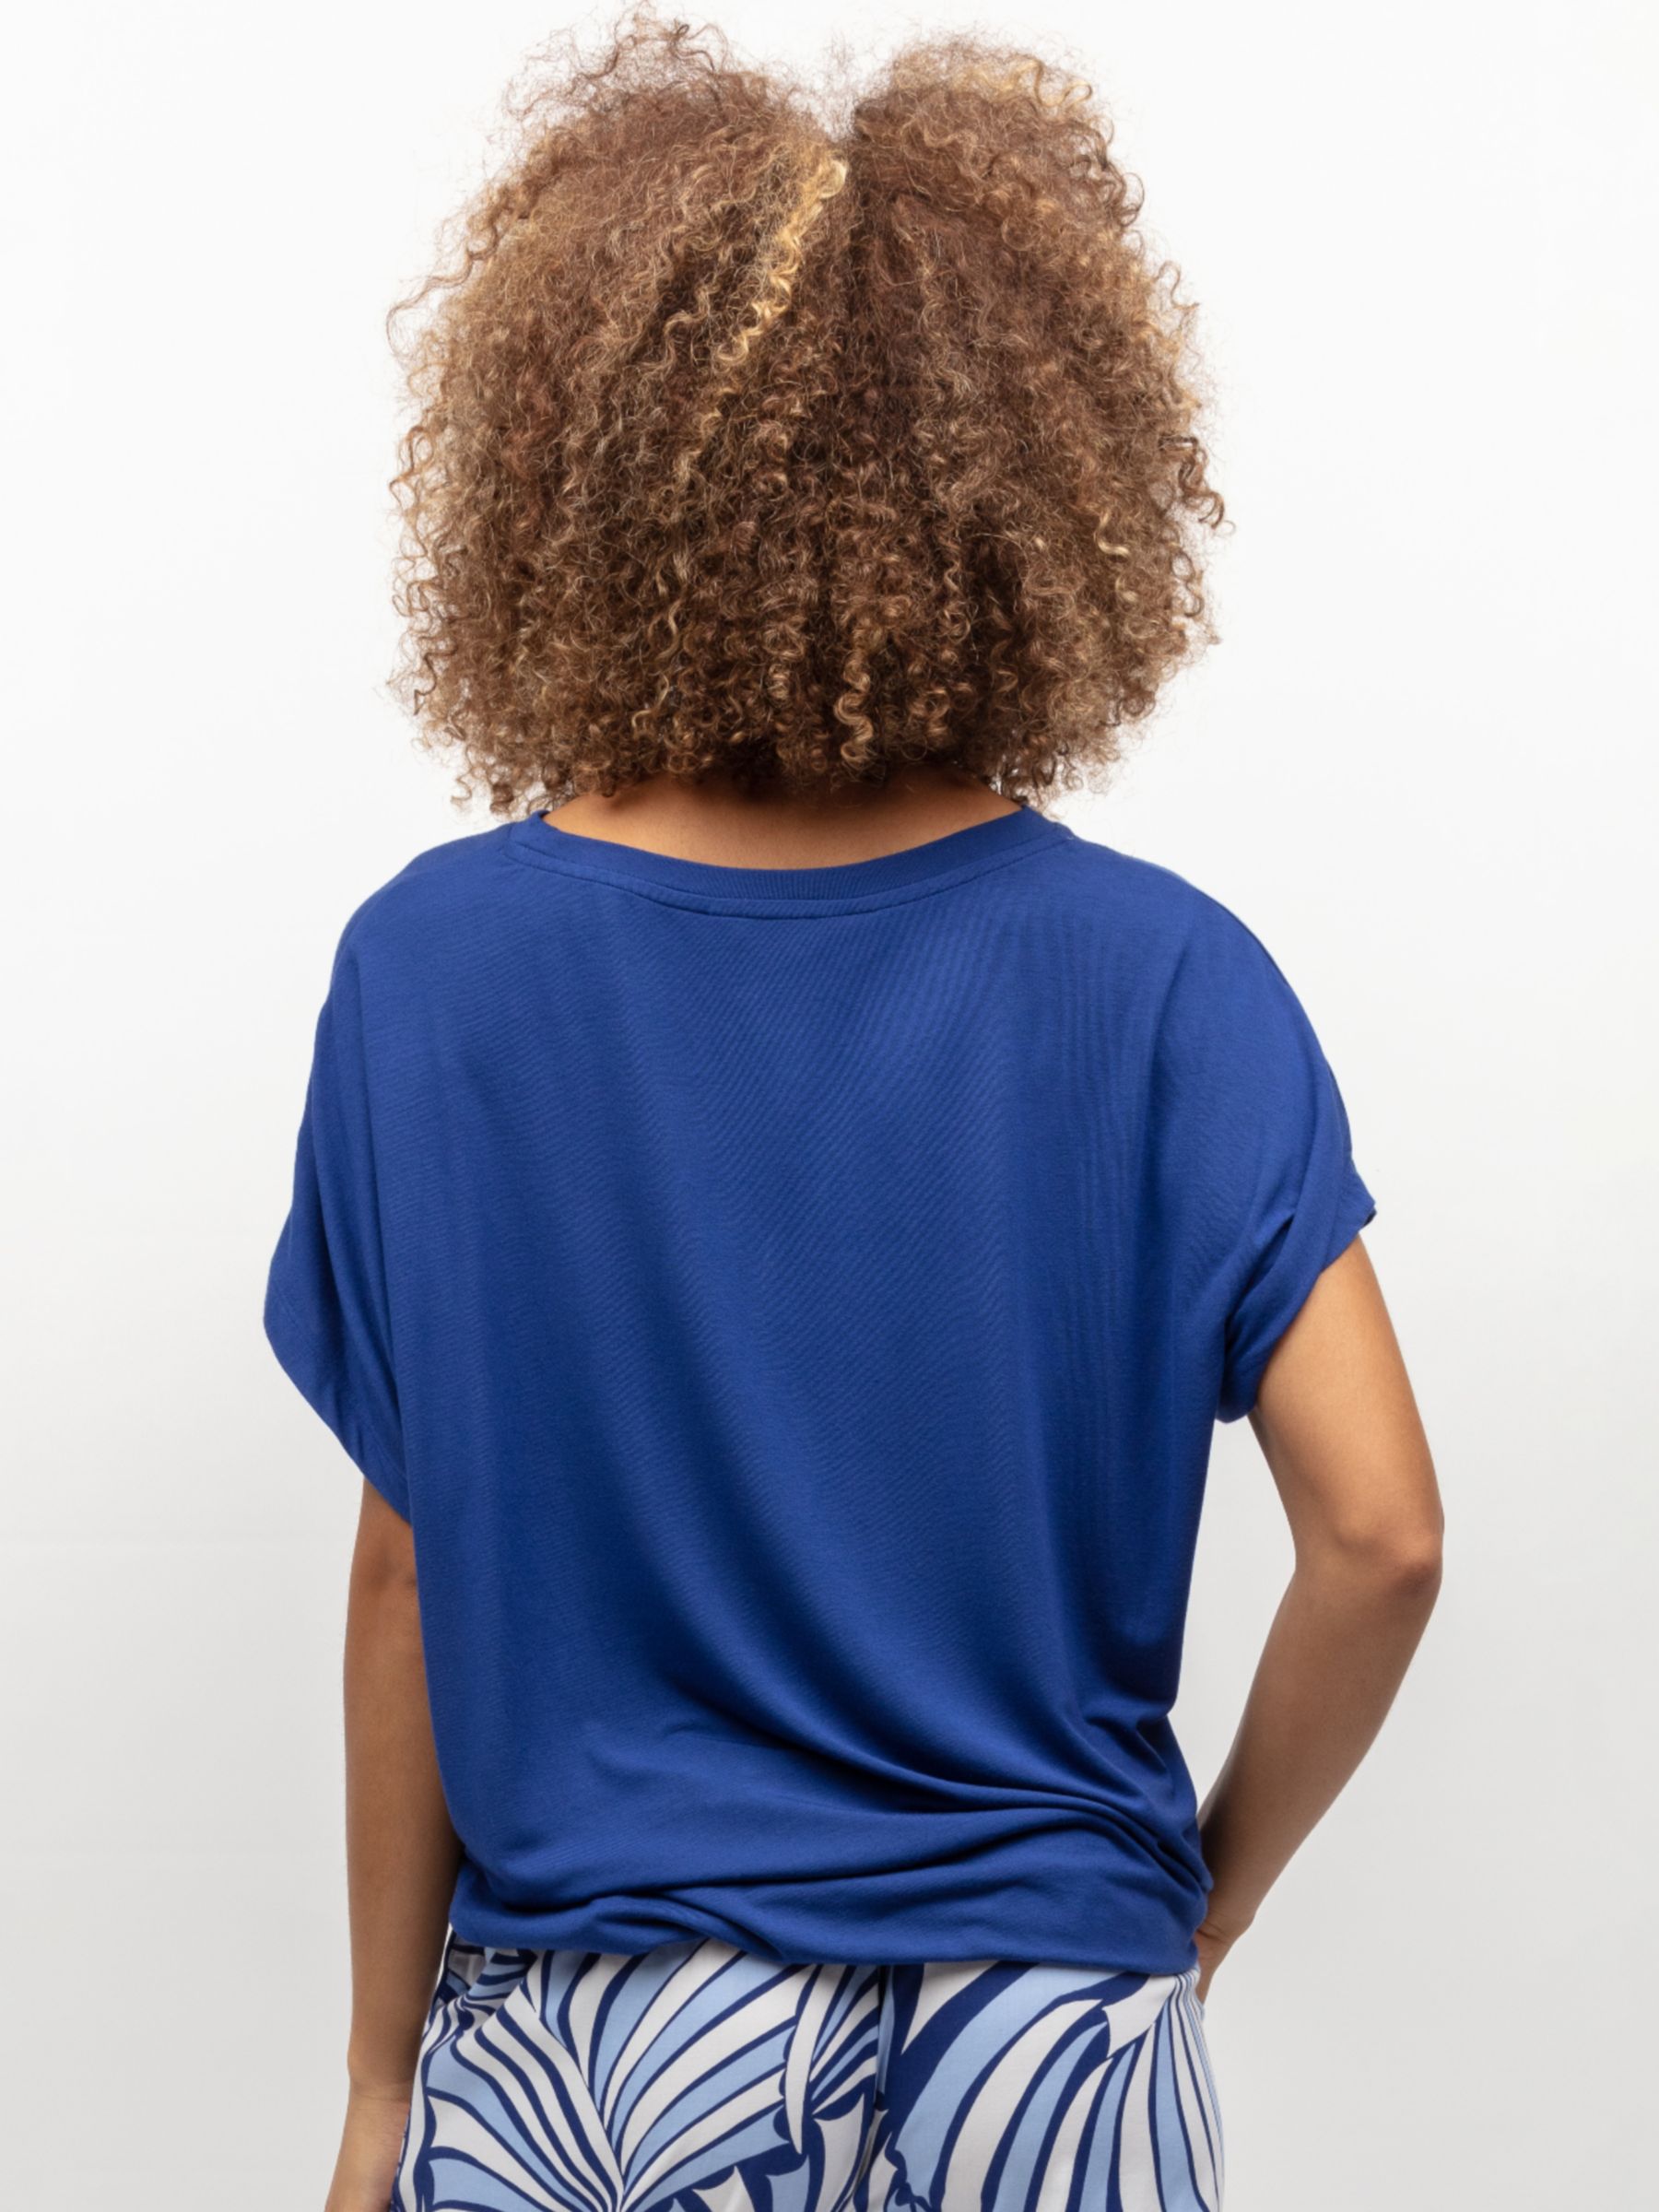 Buy Cyberjammies Madeline Jersey Slouch Top Online at johnlewis.com